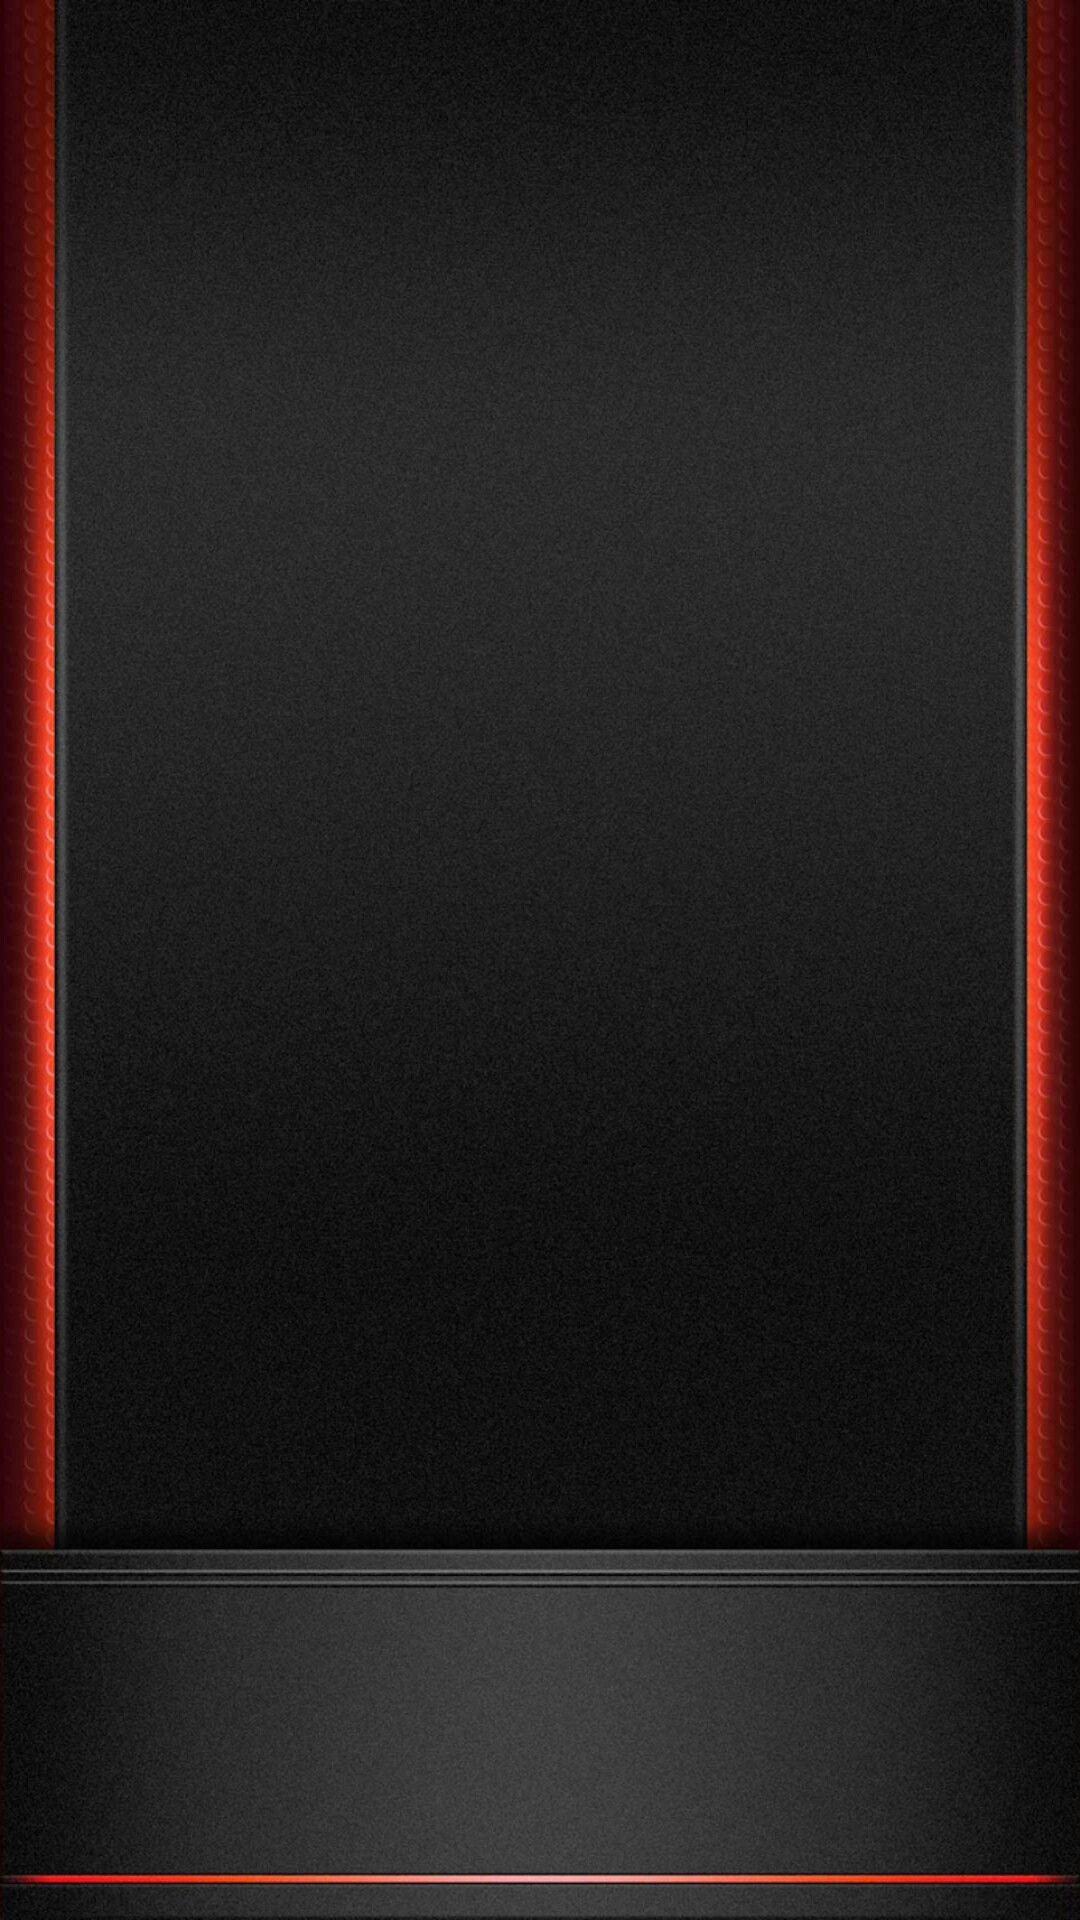 New iPhone Wallpaper. iPhone Wallpaper. Red and black wallpaper, Black wallpaper, Red wallpaper